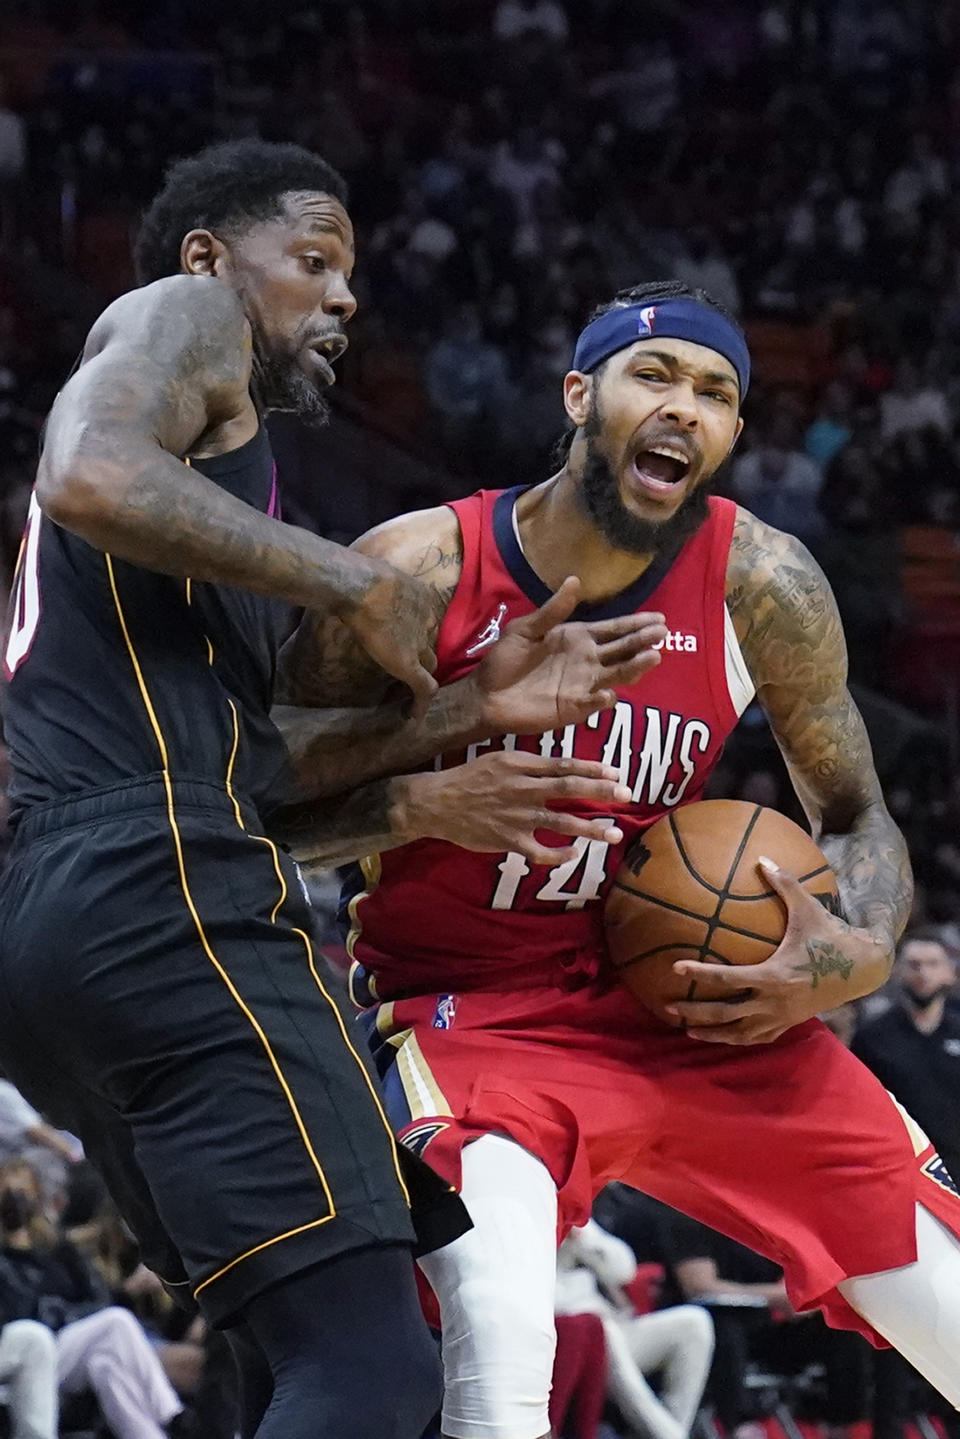 New Orleans Pelicans forward Brandon Ingram (14) drives against Miami Heat forward Udonis Haslem during the second half of an NBA basketball game, Wednesday, Nov. 17, 2021, in Miami. (AP Photo/Wilfredo Lee)